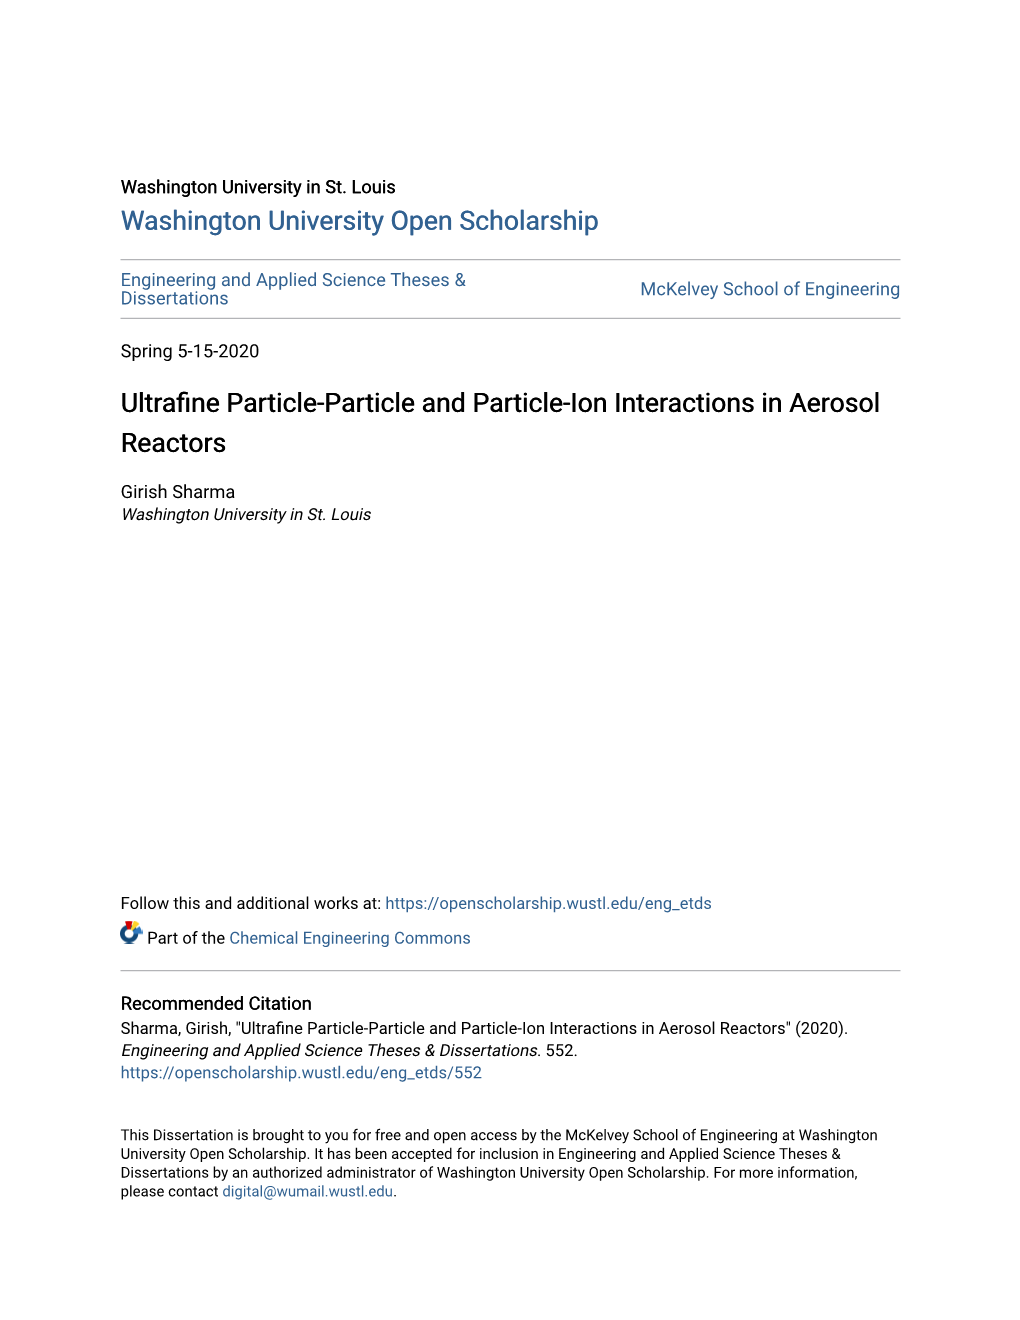 Ultrafine Particle-Particle and Particle-Ion Interactions in Aerosol Reactors by Girish Sharma